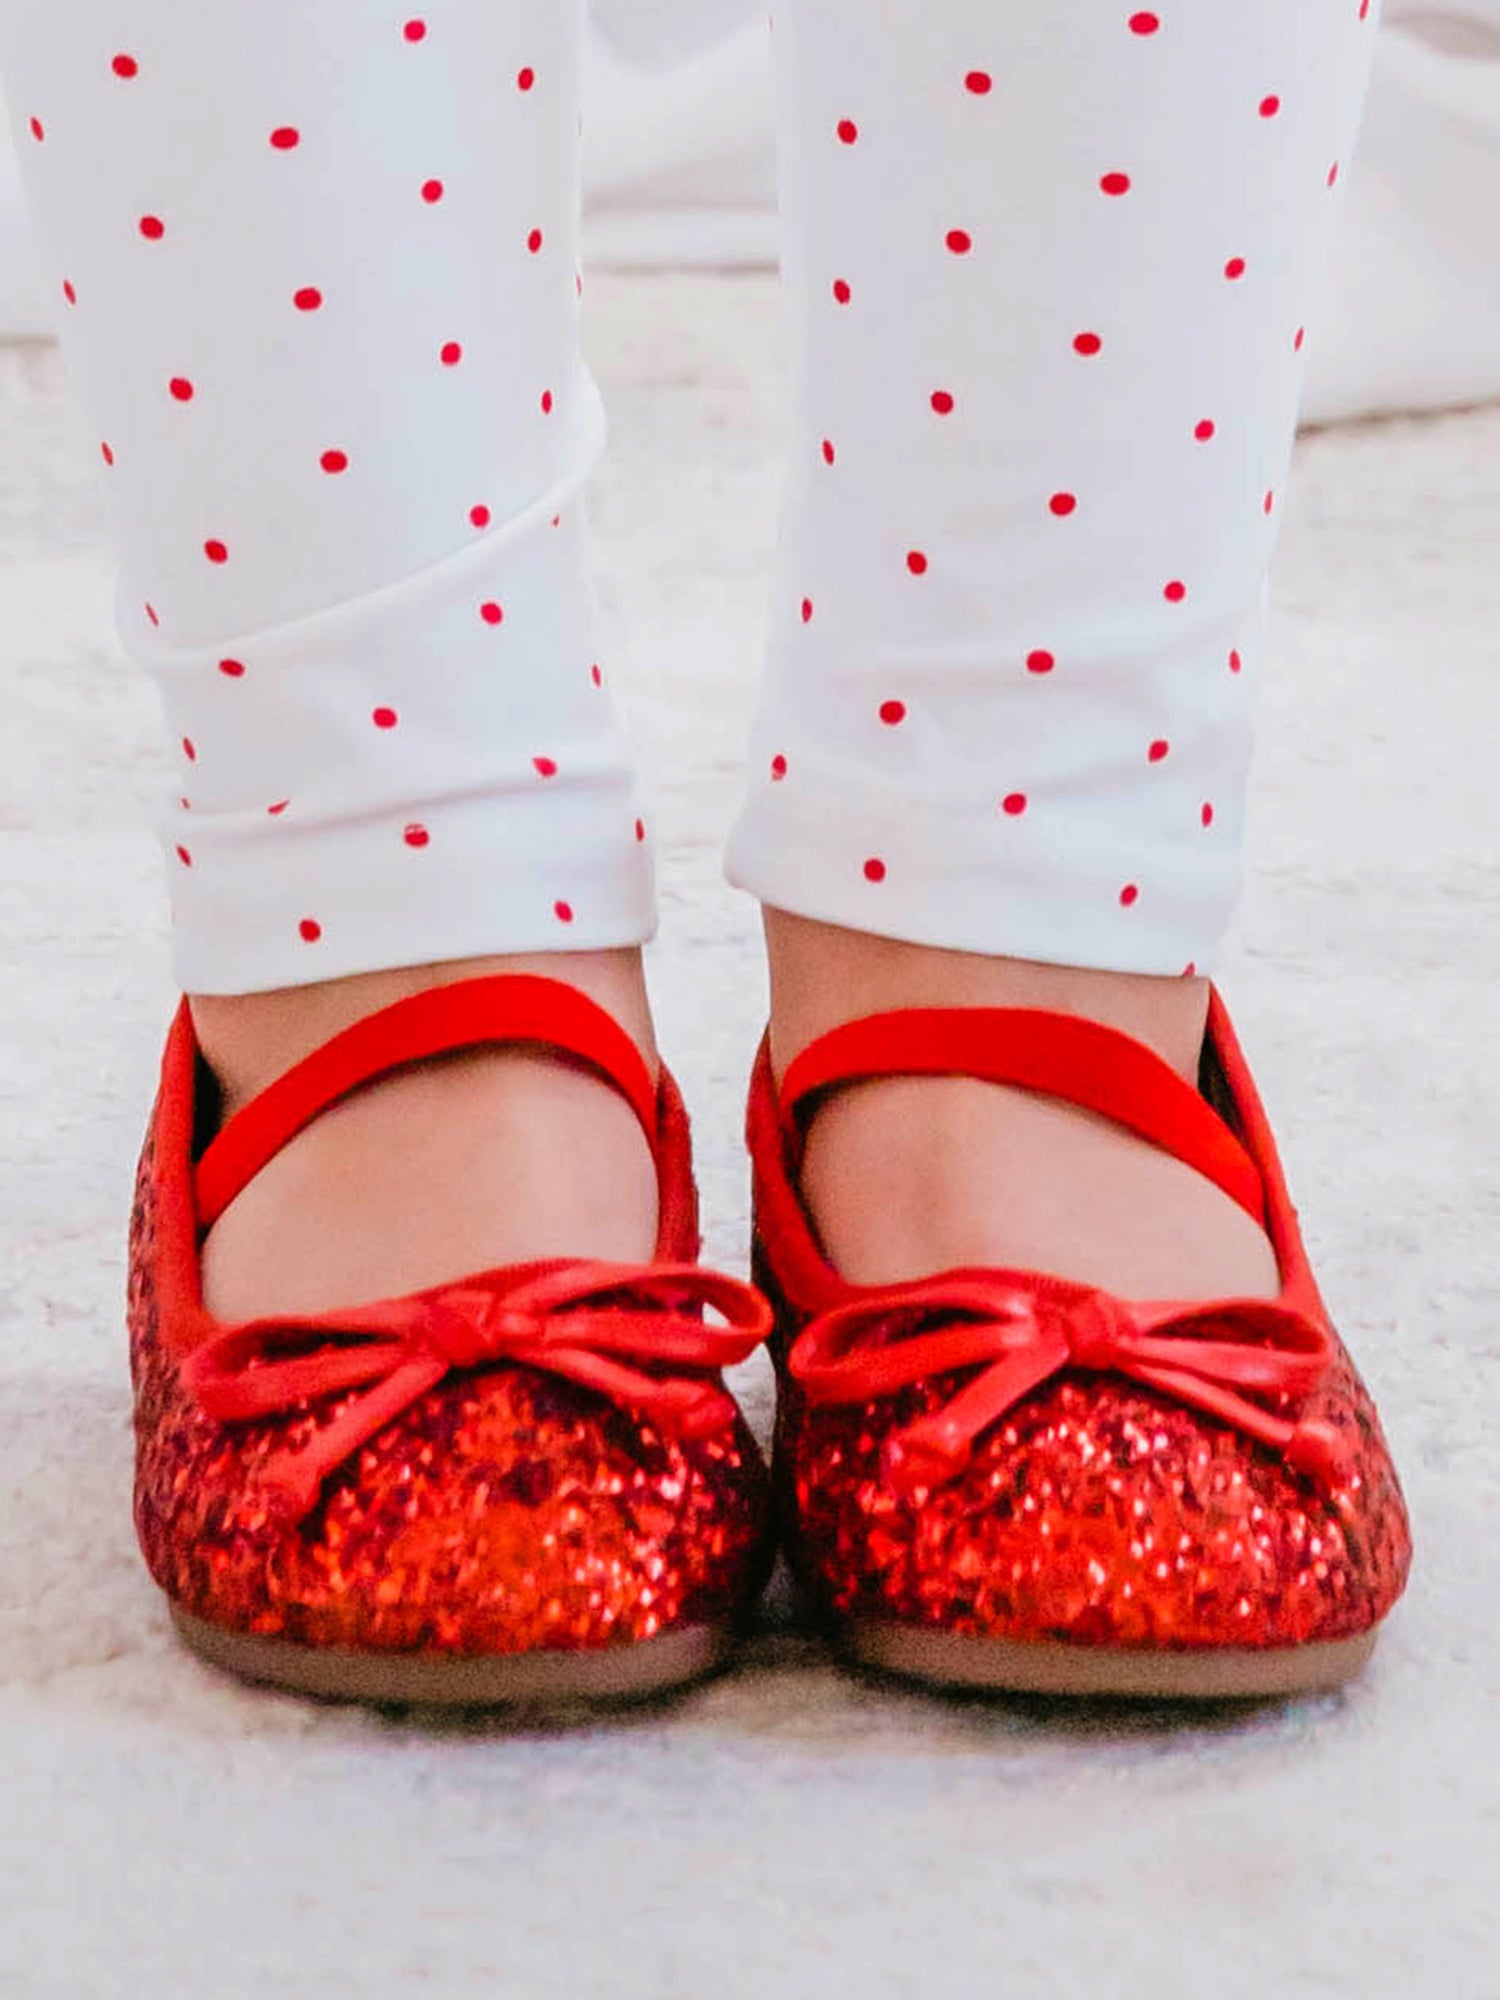 These Small Bow Glitter Ballet shoes come in red with an elastic strap across the top of the foot. The red bows bows are attached on top of the shoes’ toe.